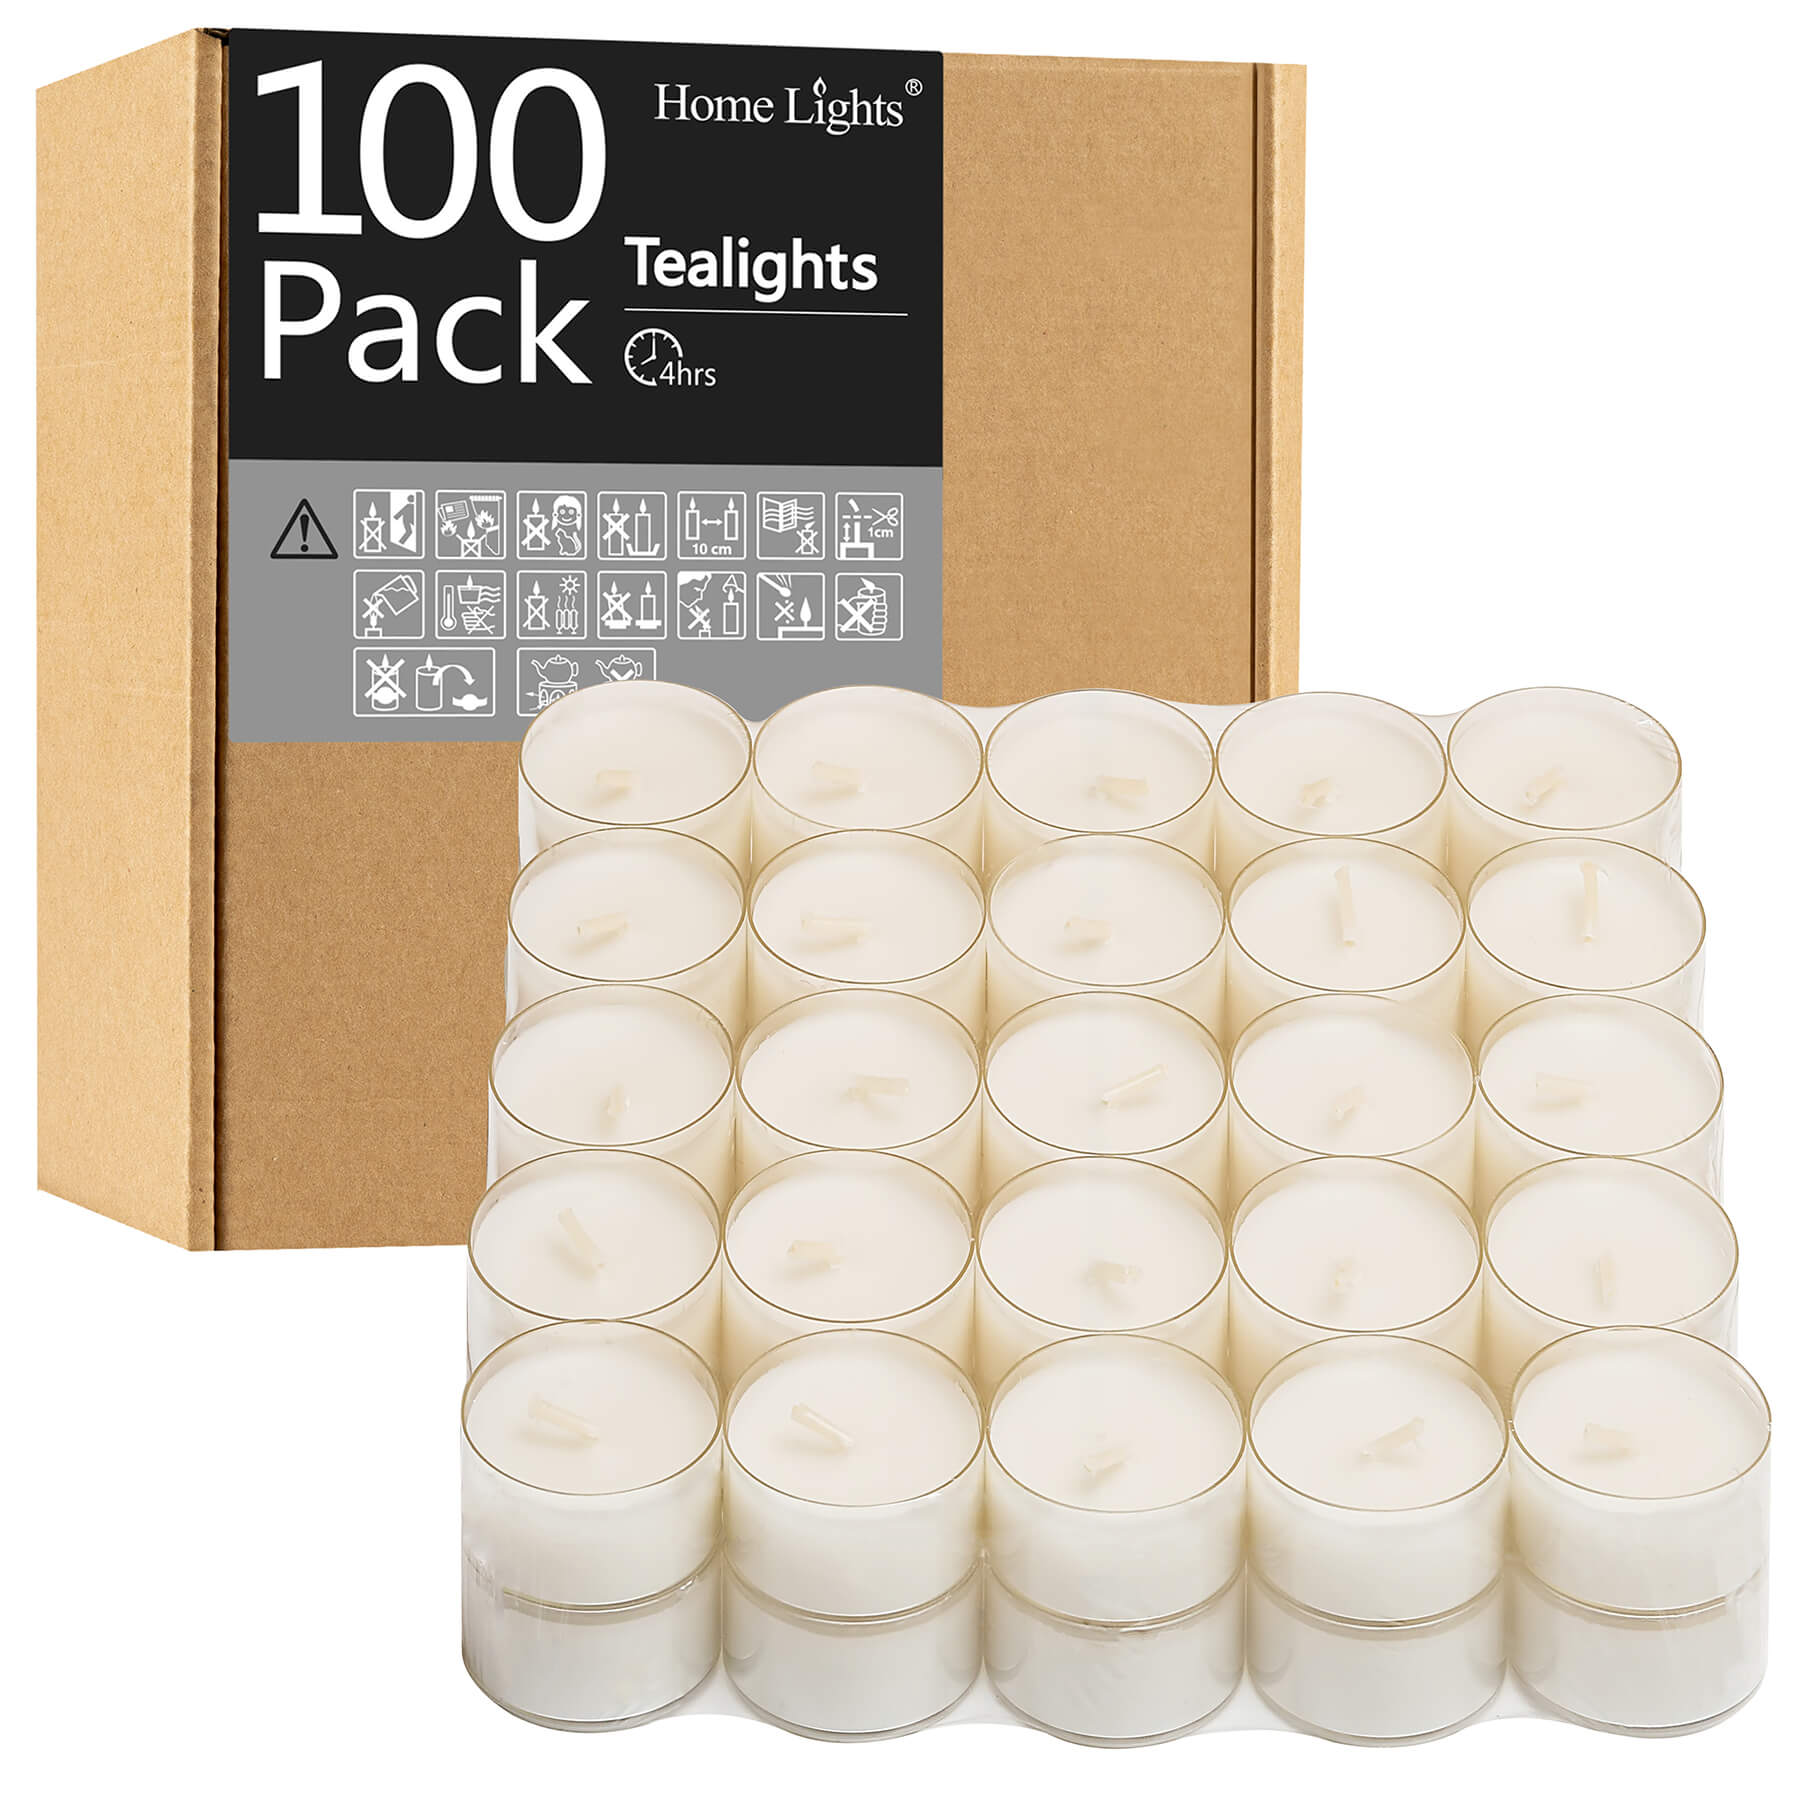 Tealight Candles, Giant 100 Bulk Packs, White Unscented European Smokeless  Clear Cup Tea Lights for Shabbat, Weddings, Christmas, Home Decorative- 100